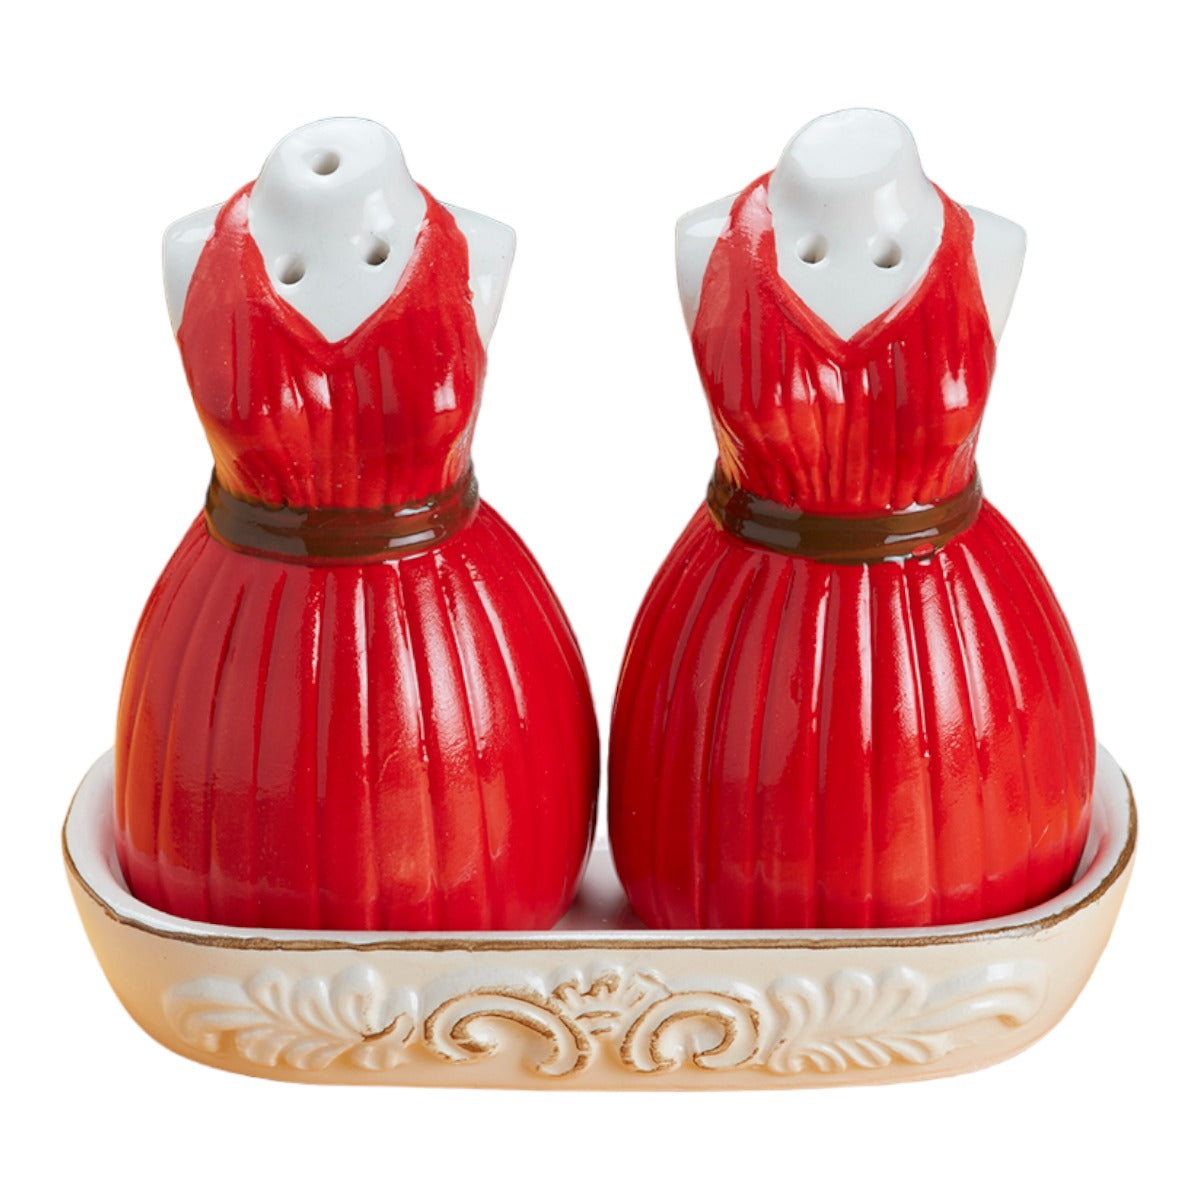 Ceramic Salt Pepper Container Set with tray for Dining Table (9973)